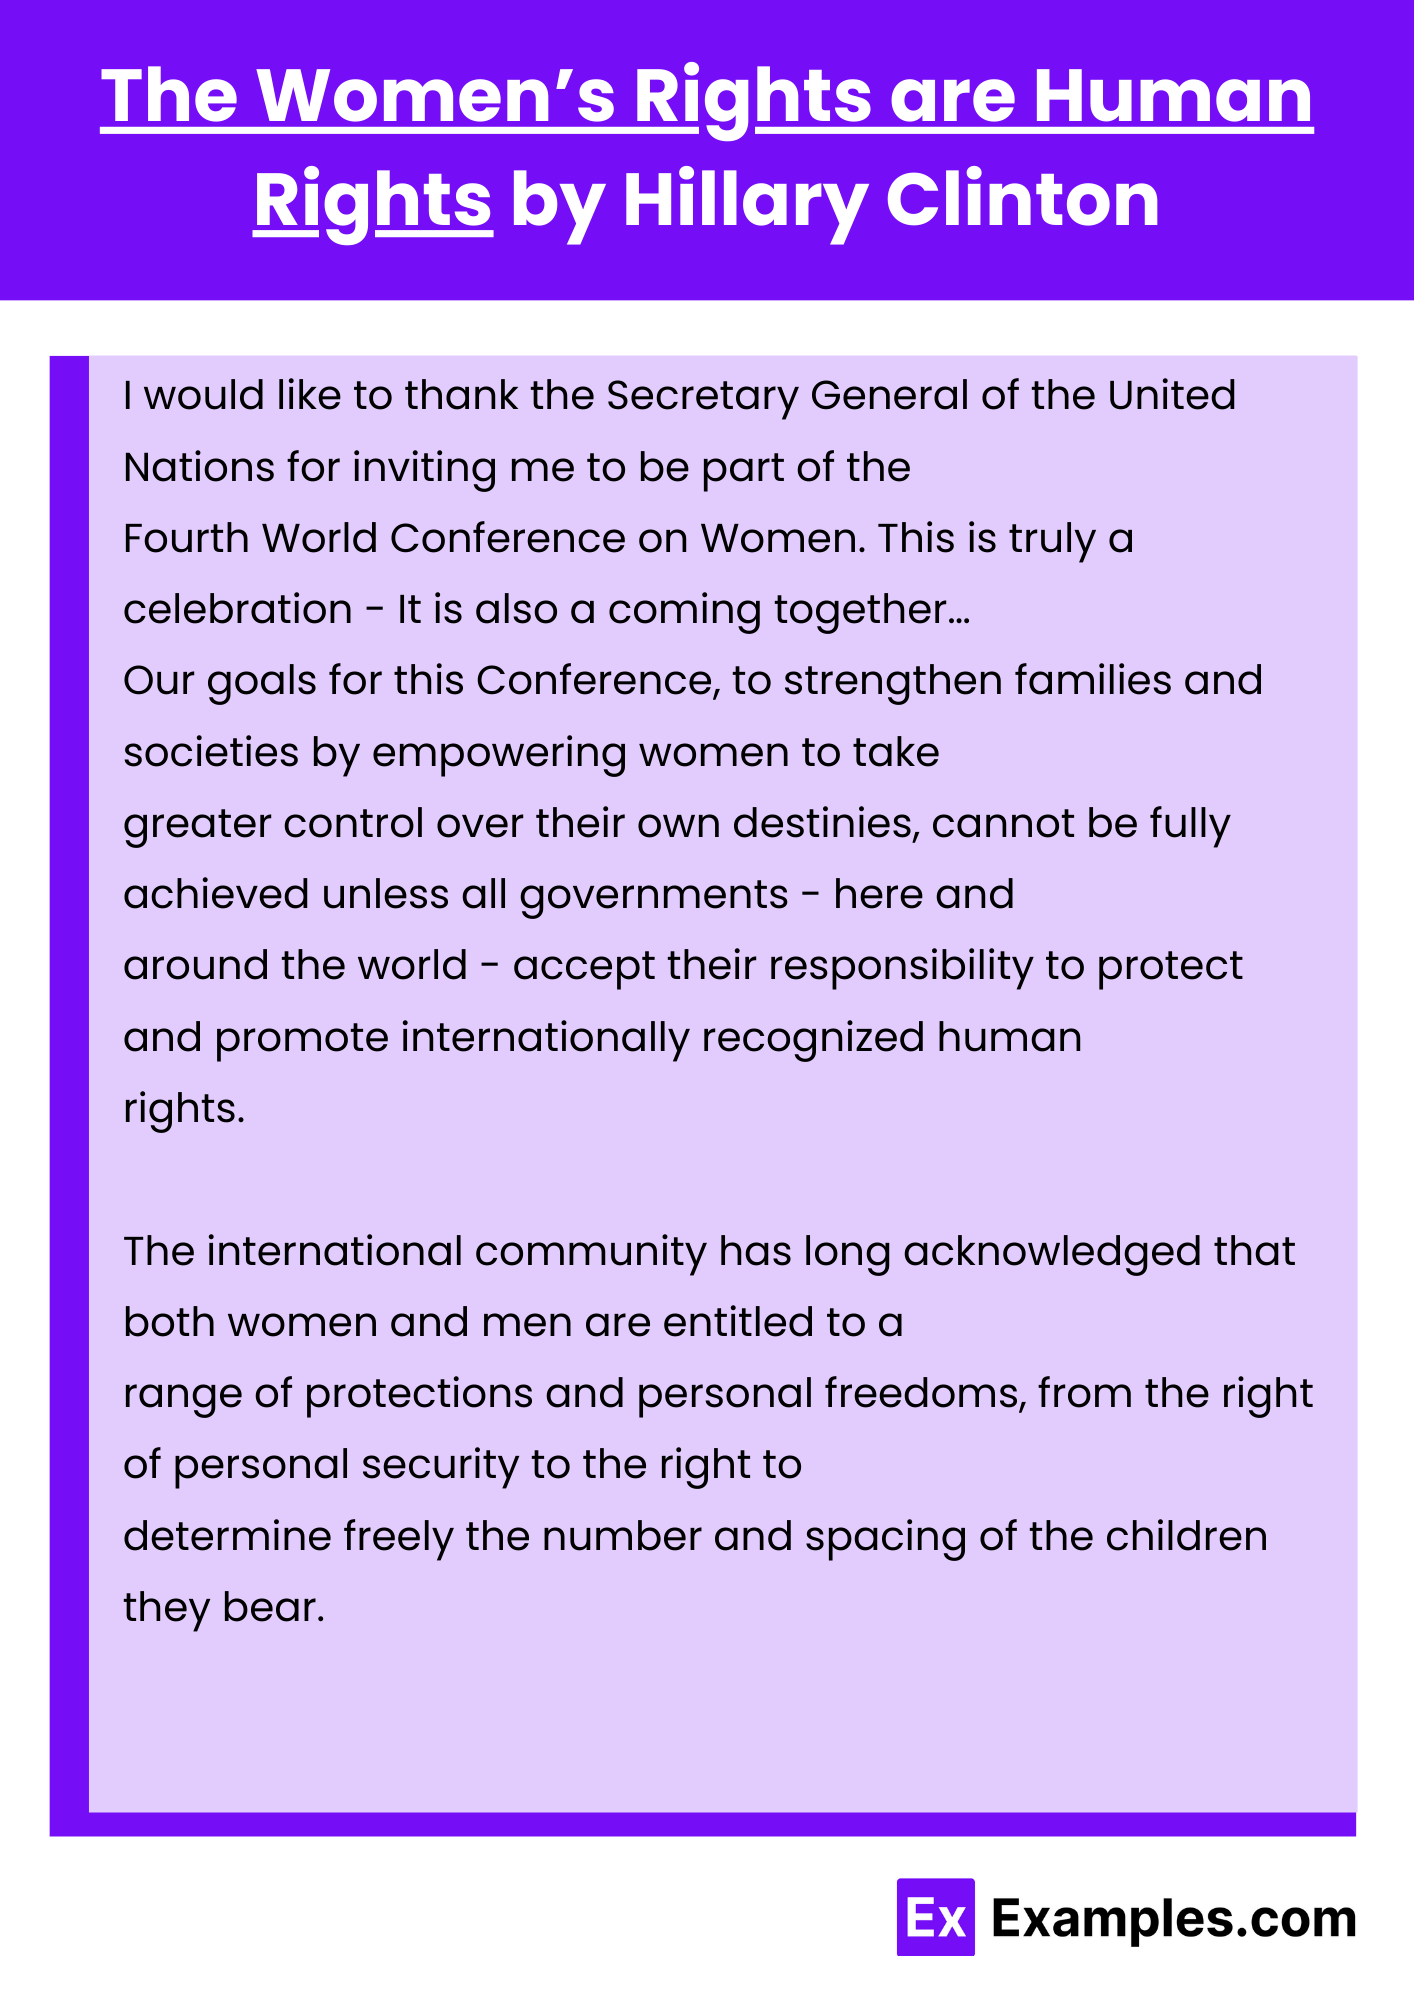 The Women’s Rights are Human Rights by Hillary Clinton